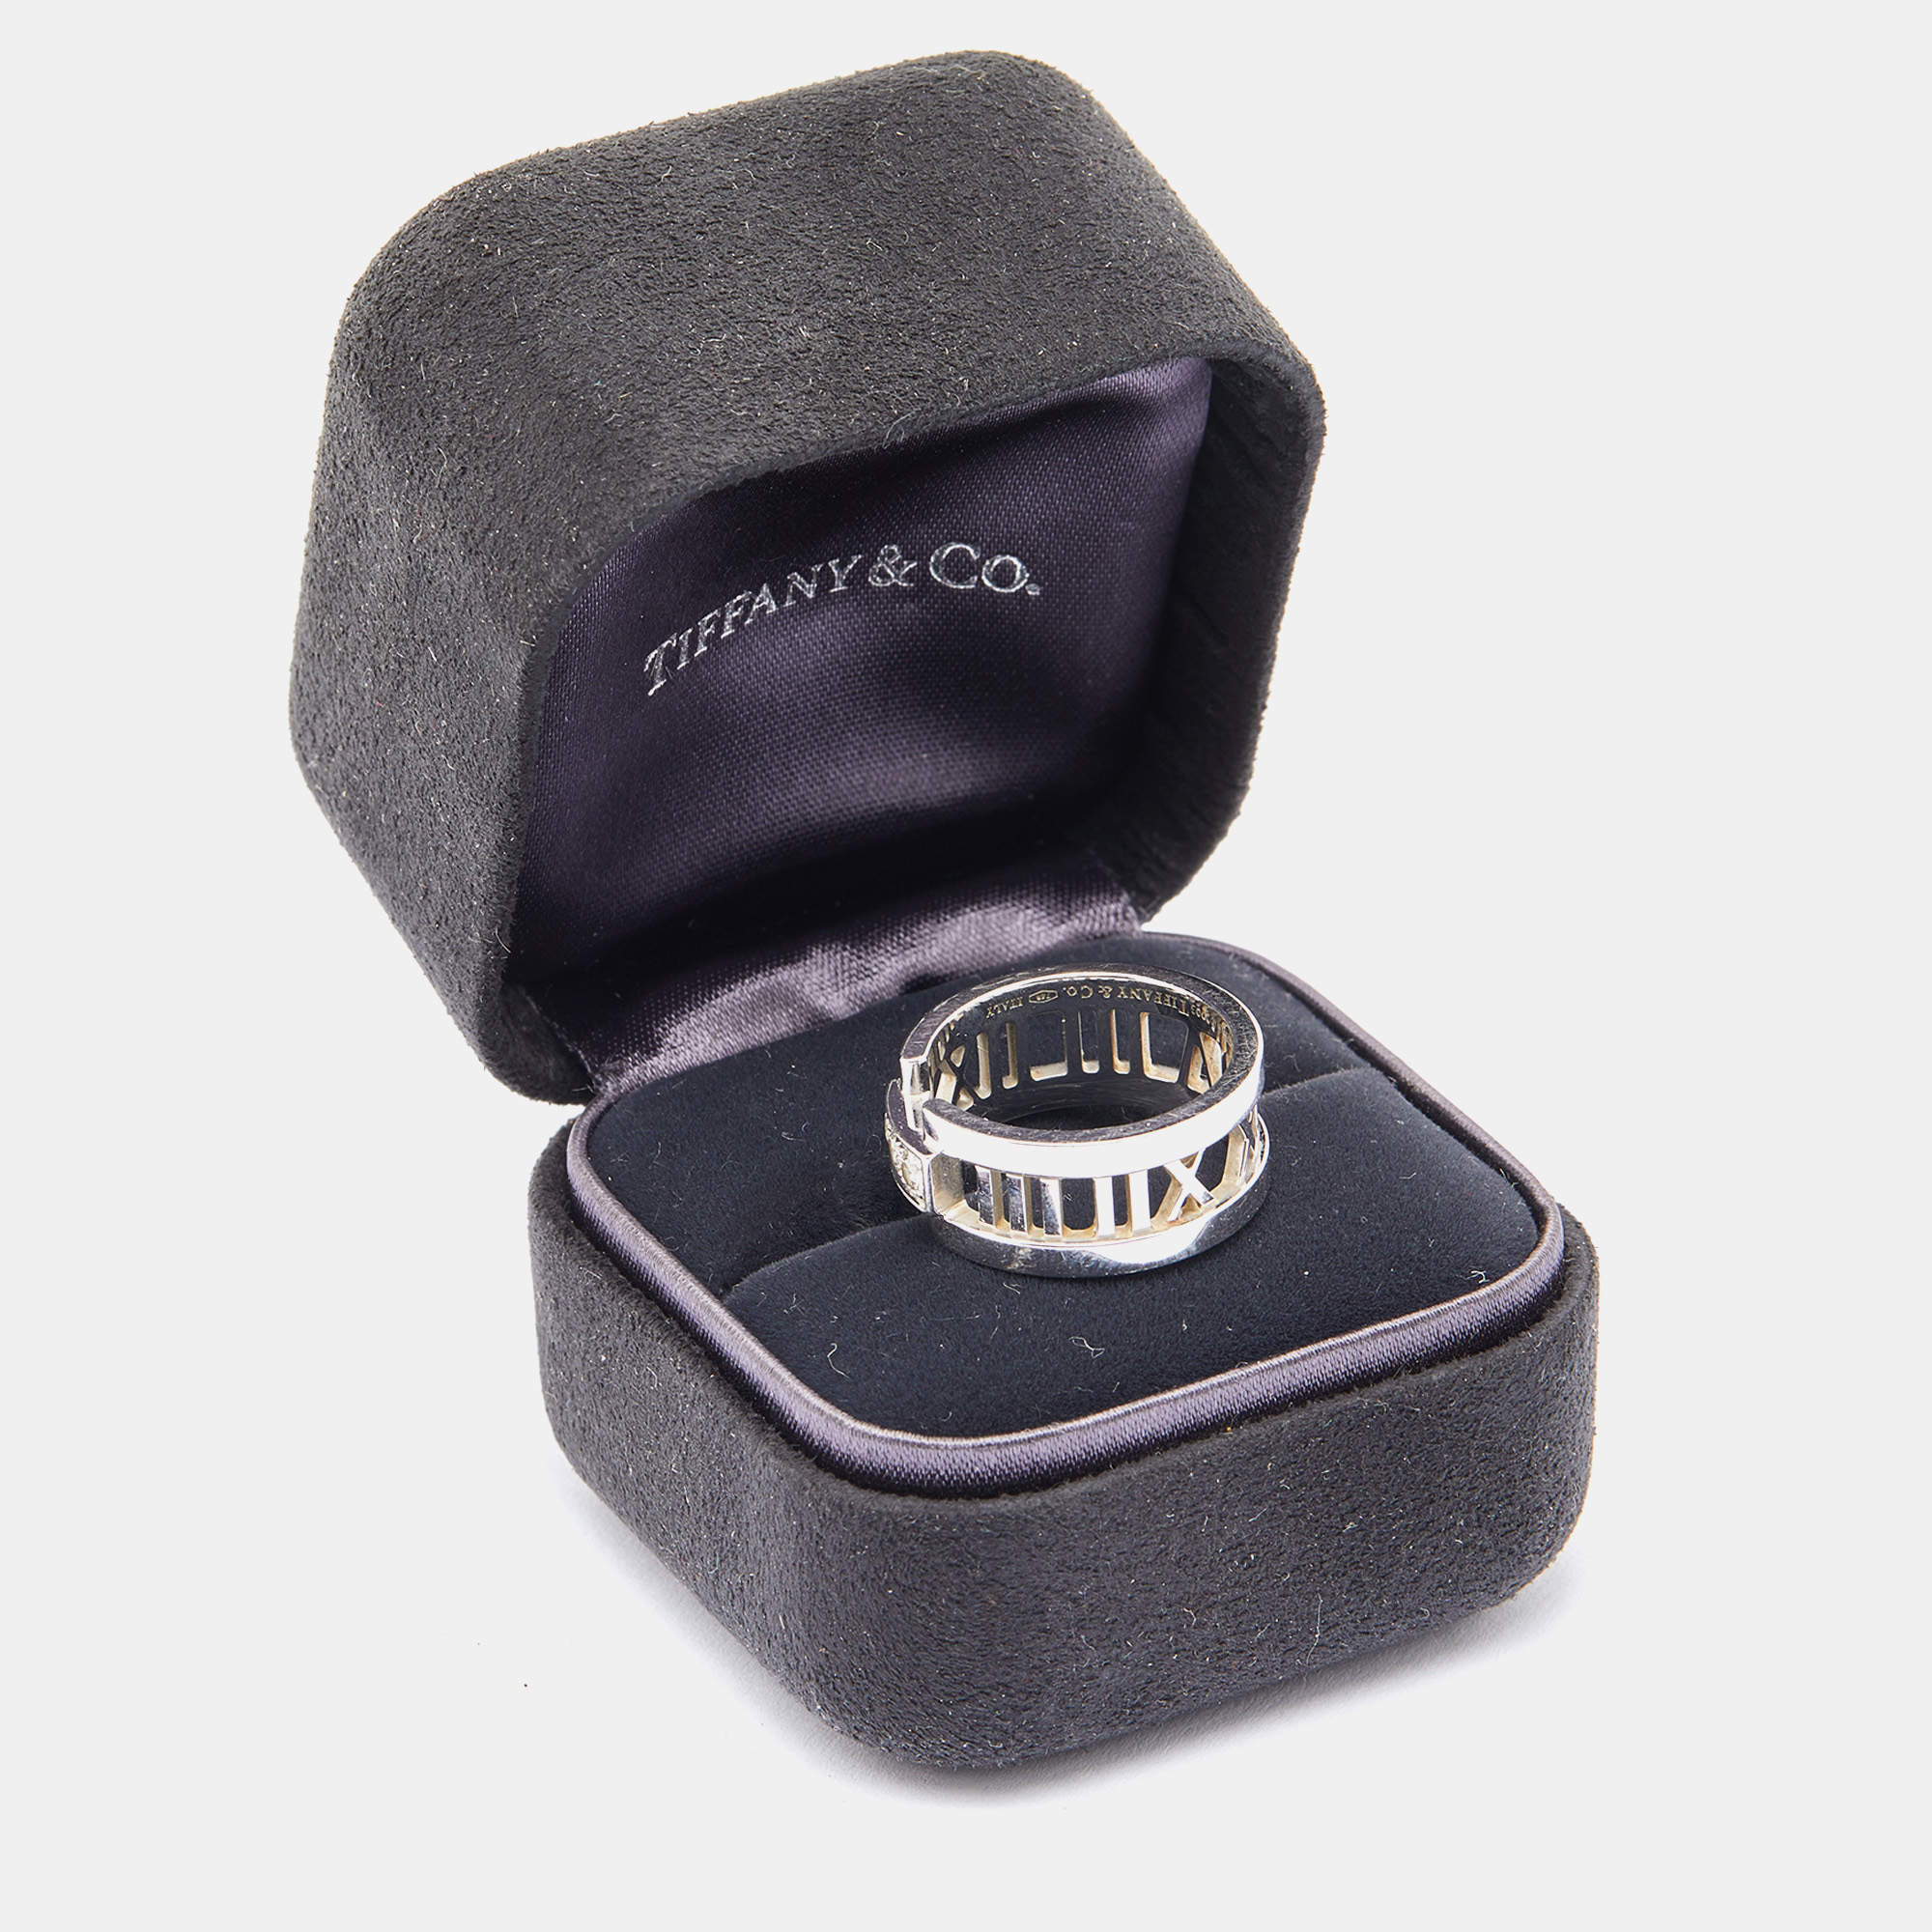 Tiffany & Co. Atlas 18K White Gold Open Roman Numeral Band Ring Size 7.5  #TiffanyCo #Band